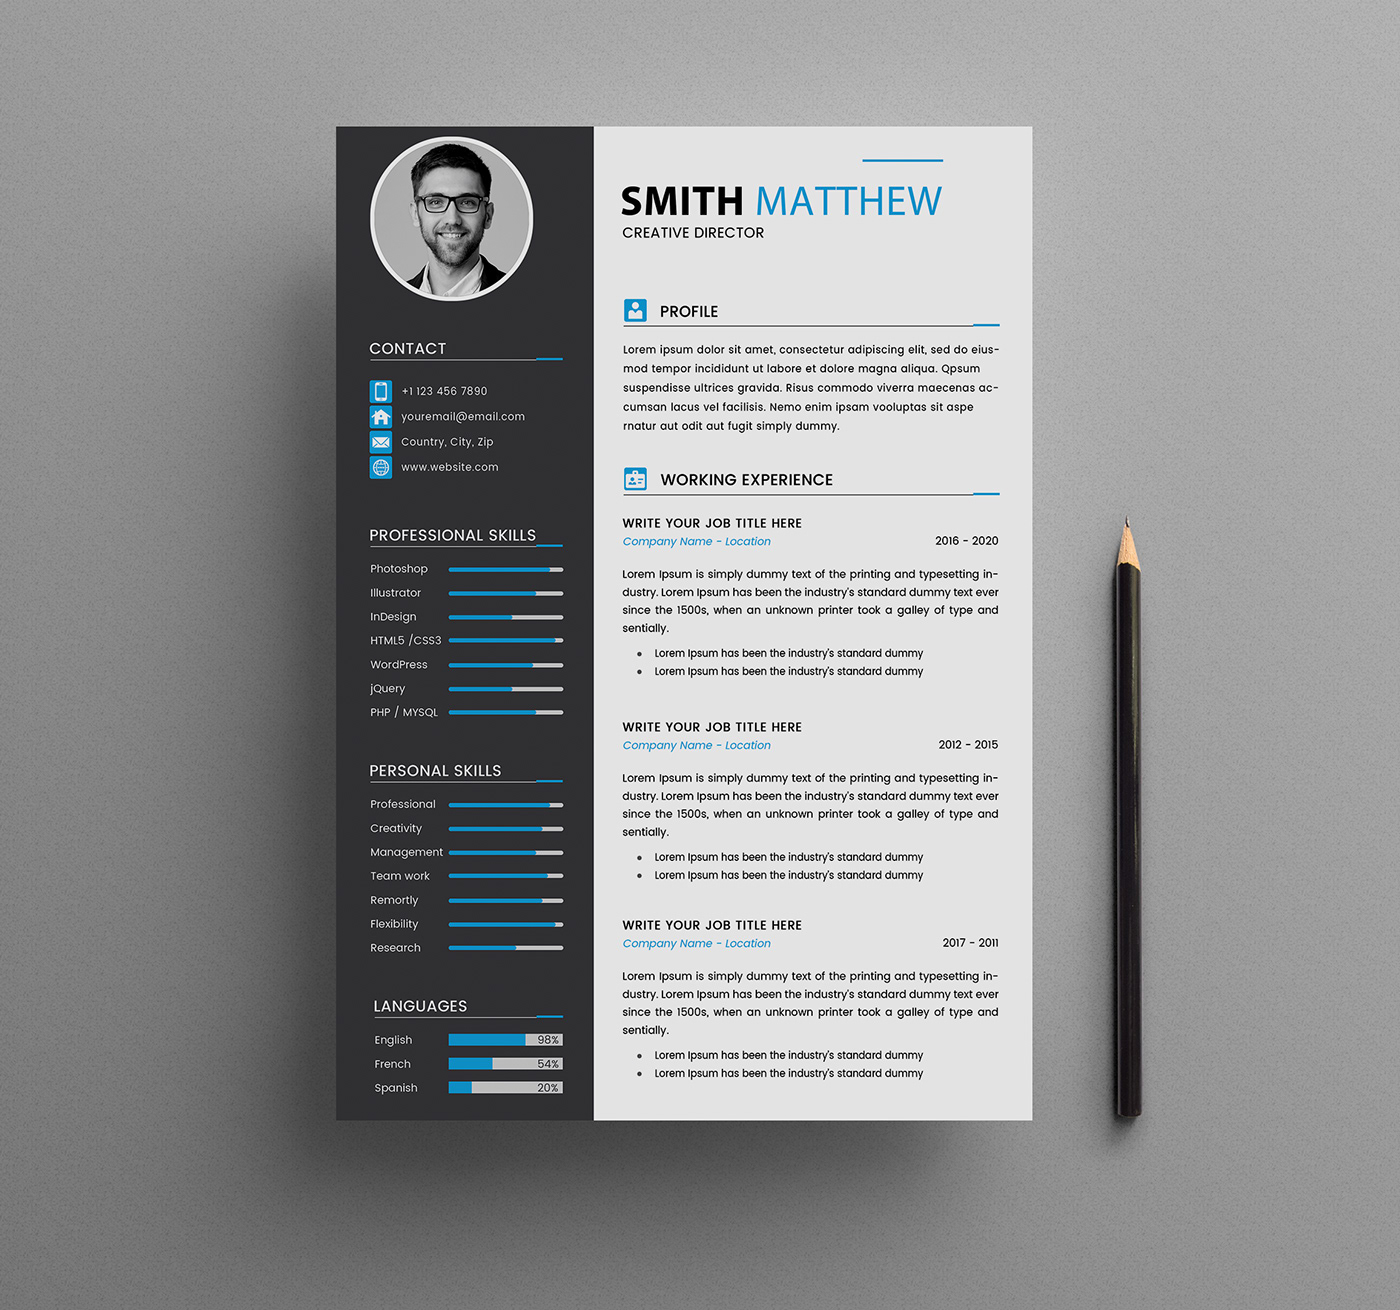 How To Make Your resume Look Amazing In 5 Days